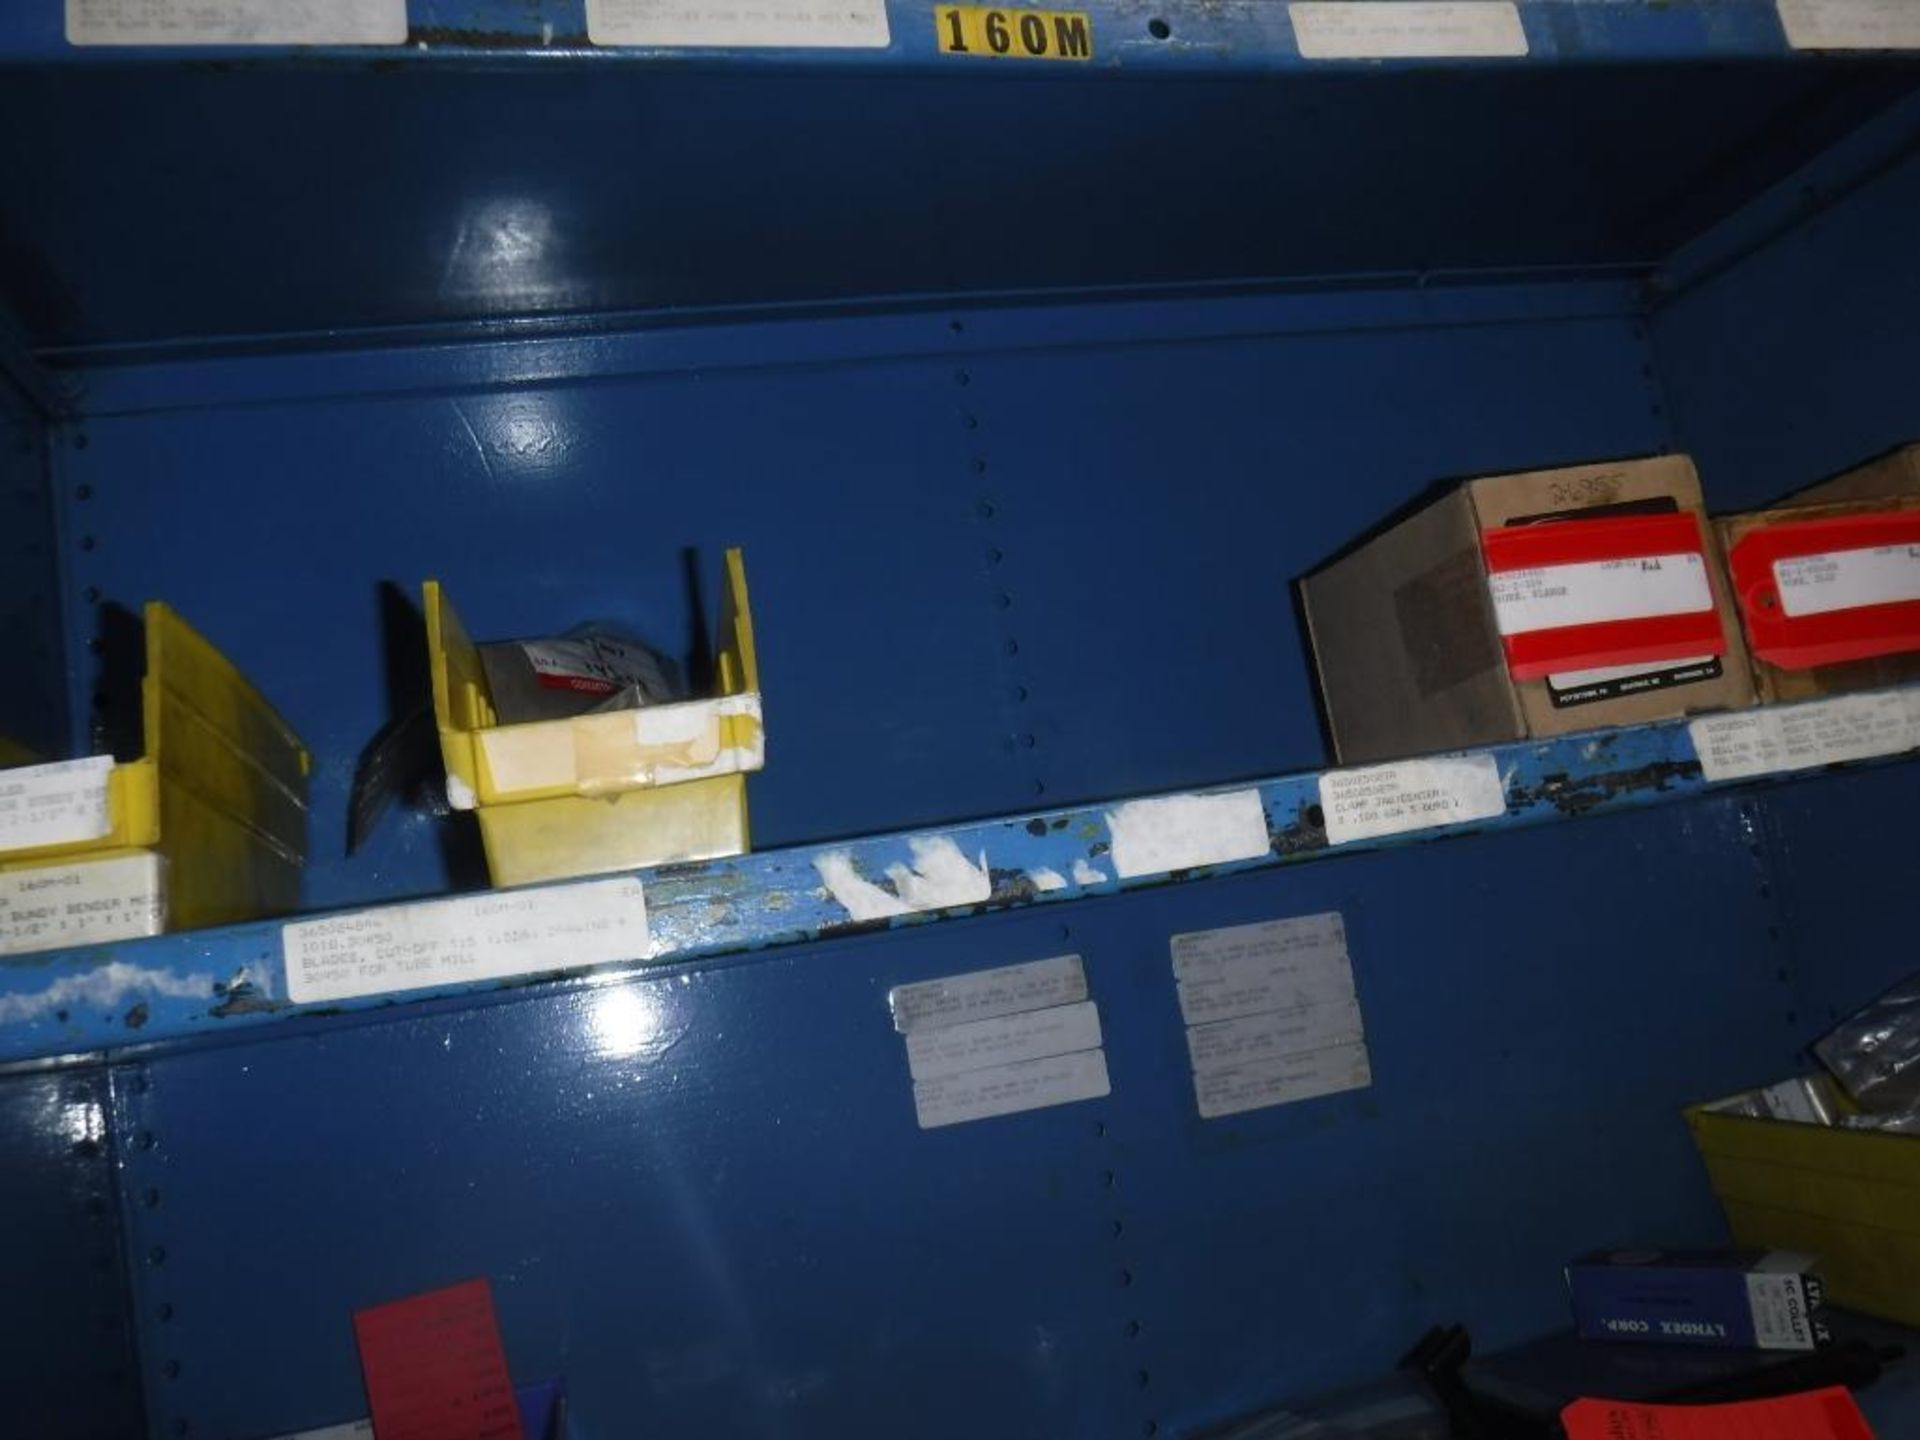 Contents of Shelving 155M Thru 164-5M-Pins,Valves,Shafts,Socket,Actuator,Idler Wheel,Wire Carrier,Ai - Image 17 of 33